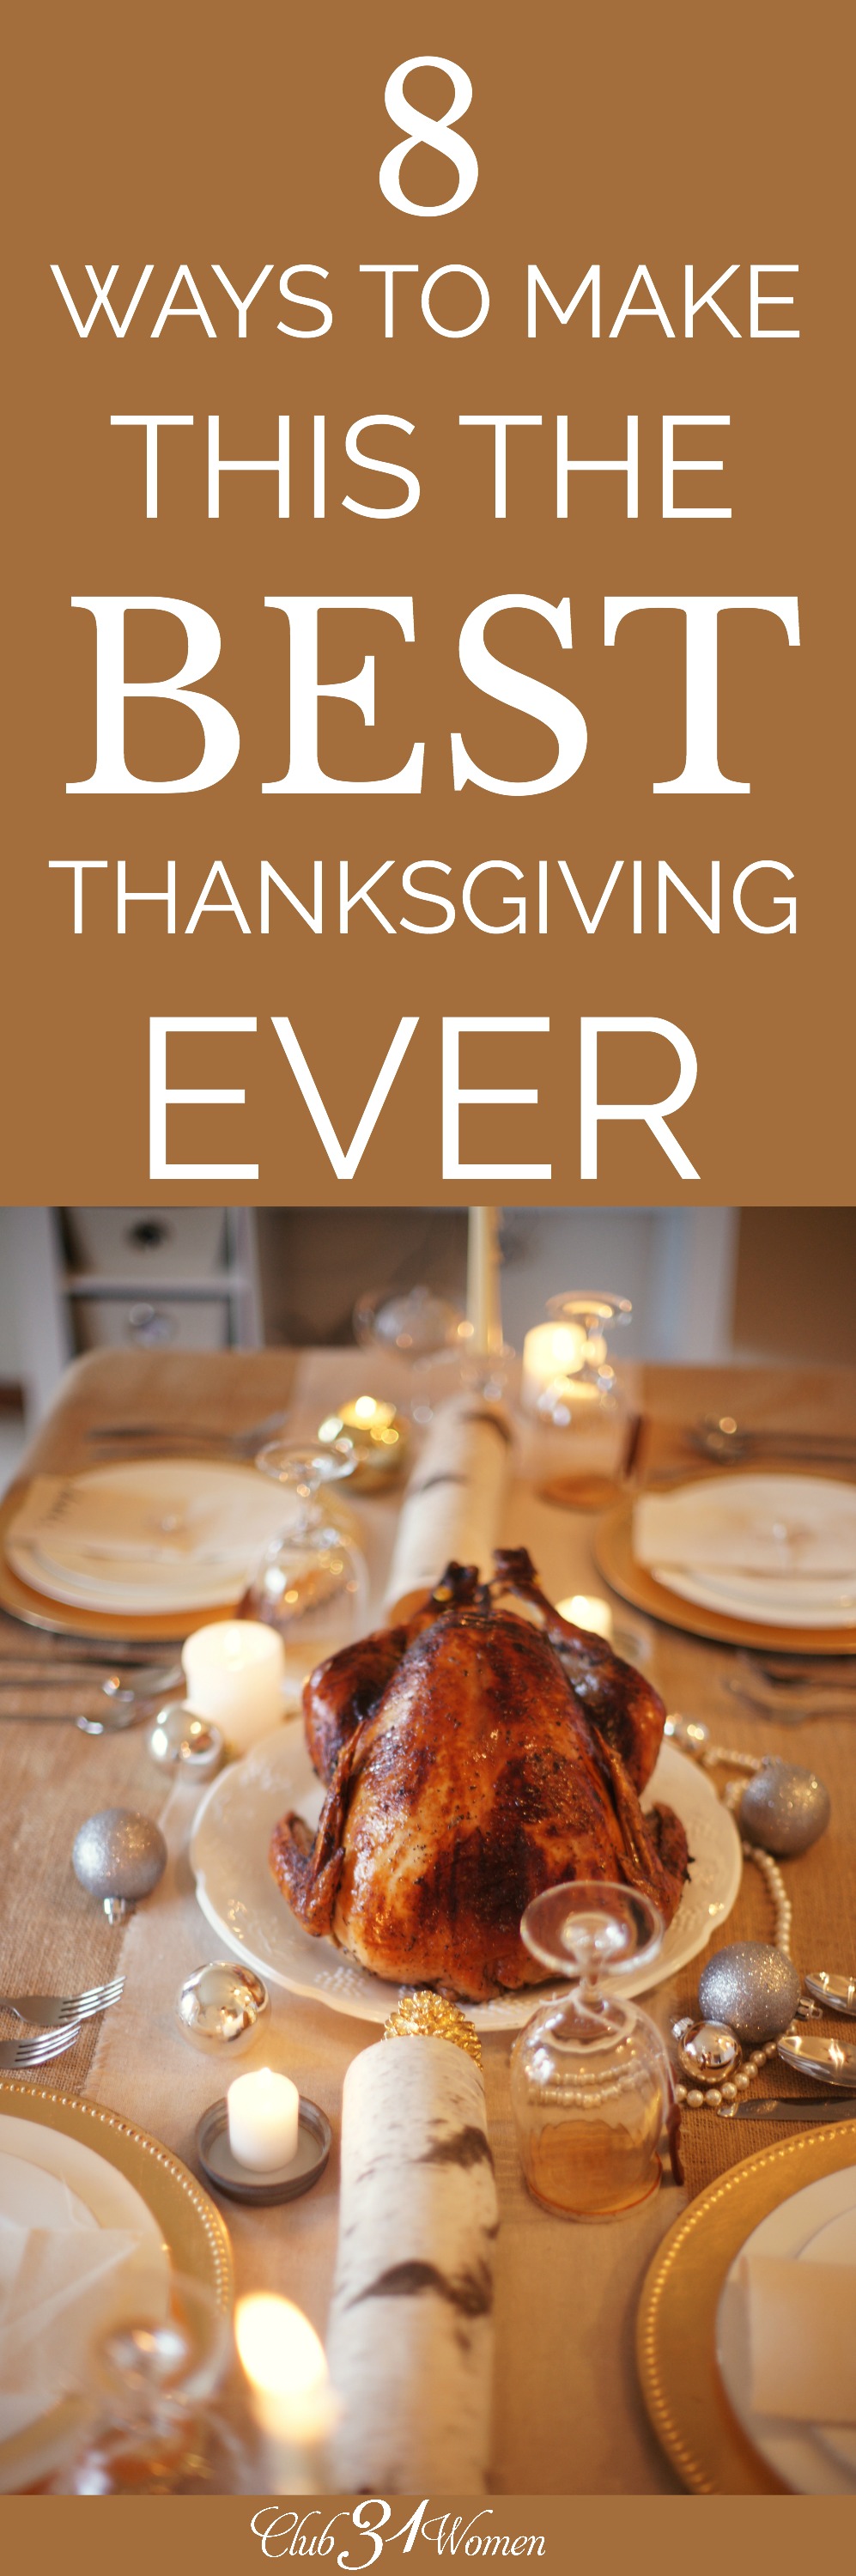 8 Ways to Make This the Best Thanksgiving Ever via @Club31Women